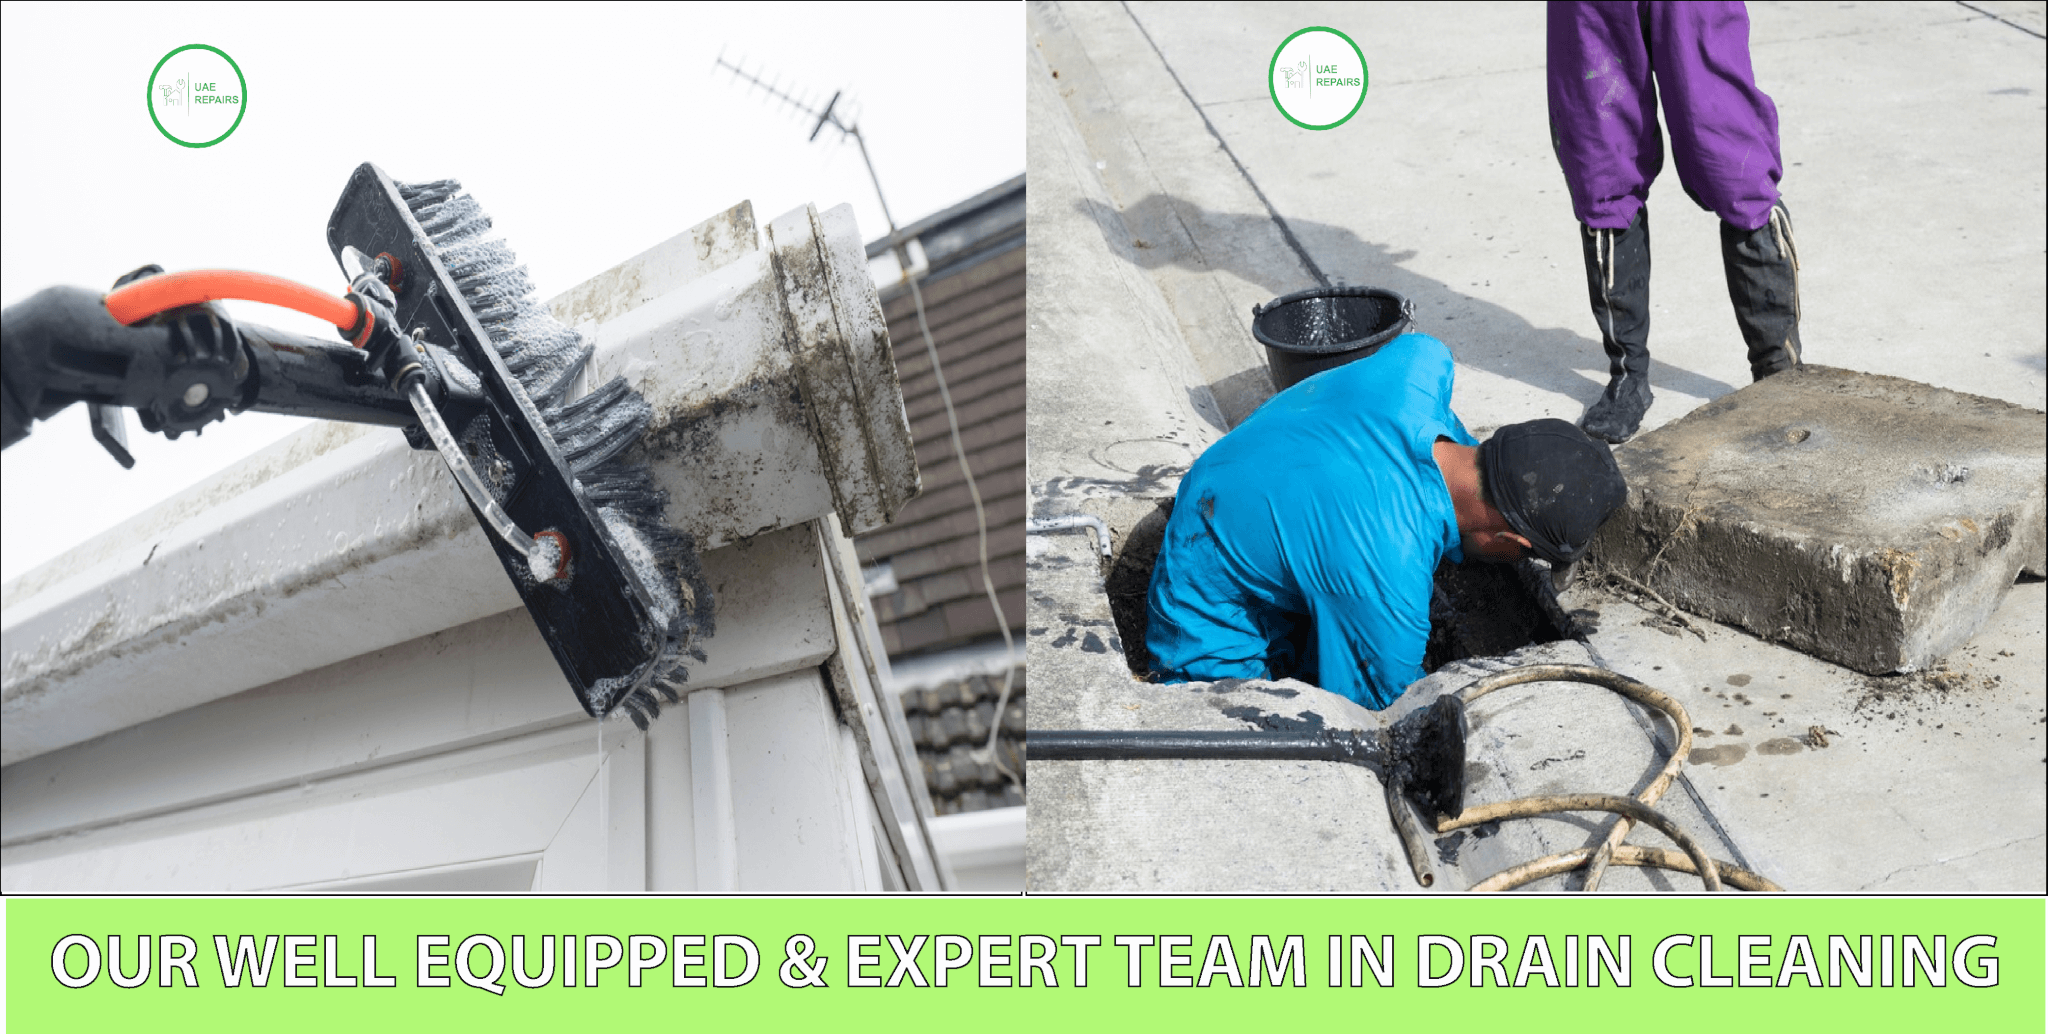 UAE REPAIRS OUR WELL EQUIPPED & EXPERT TEAM FOR DRAIN CLEANING IN UAE